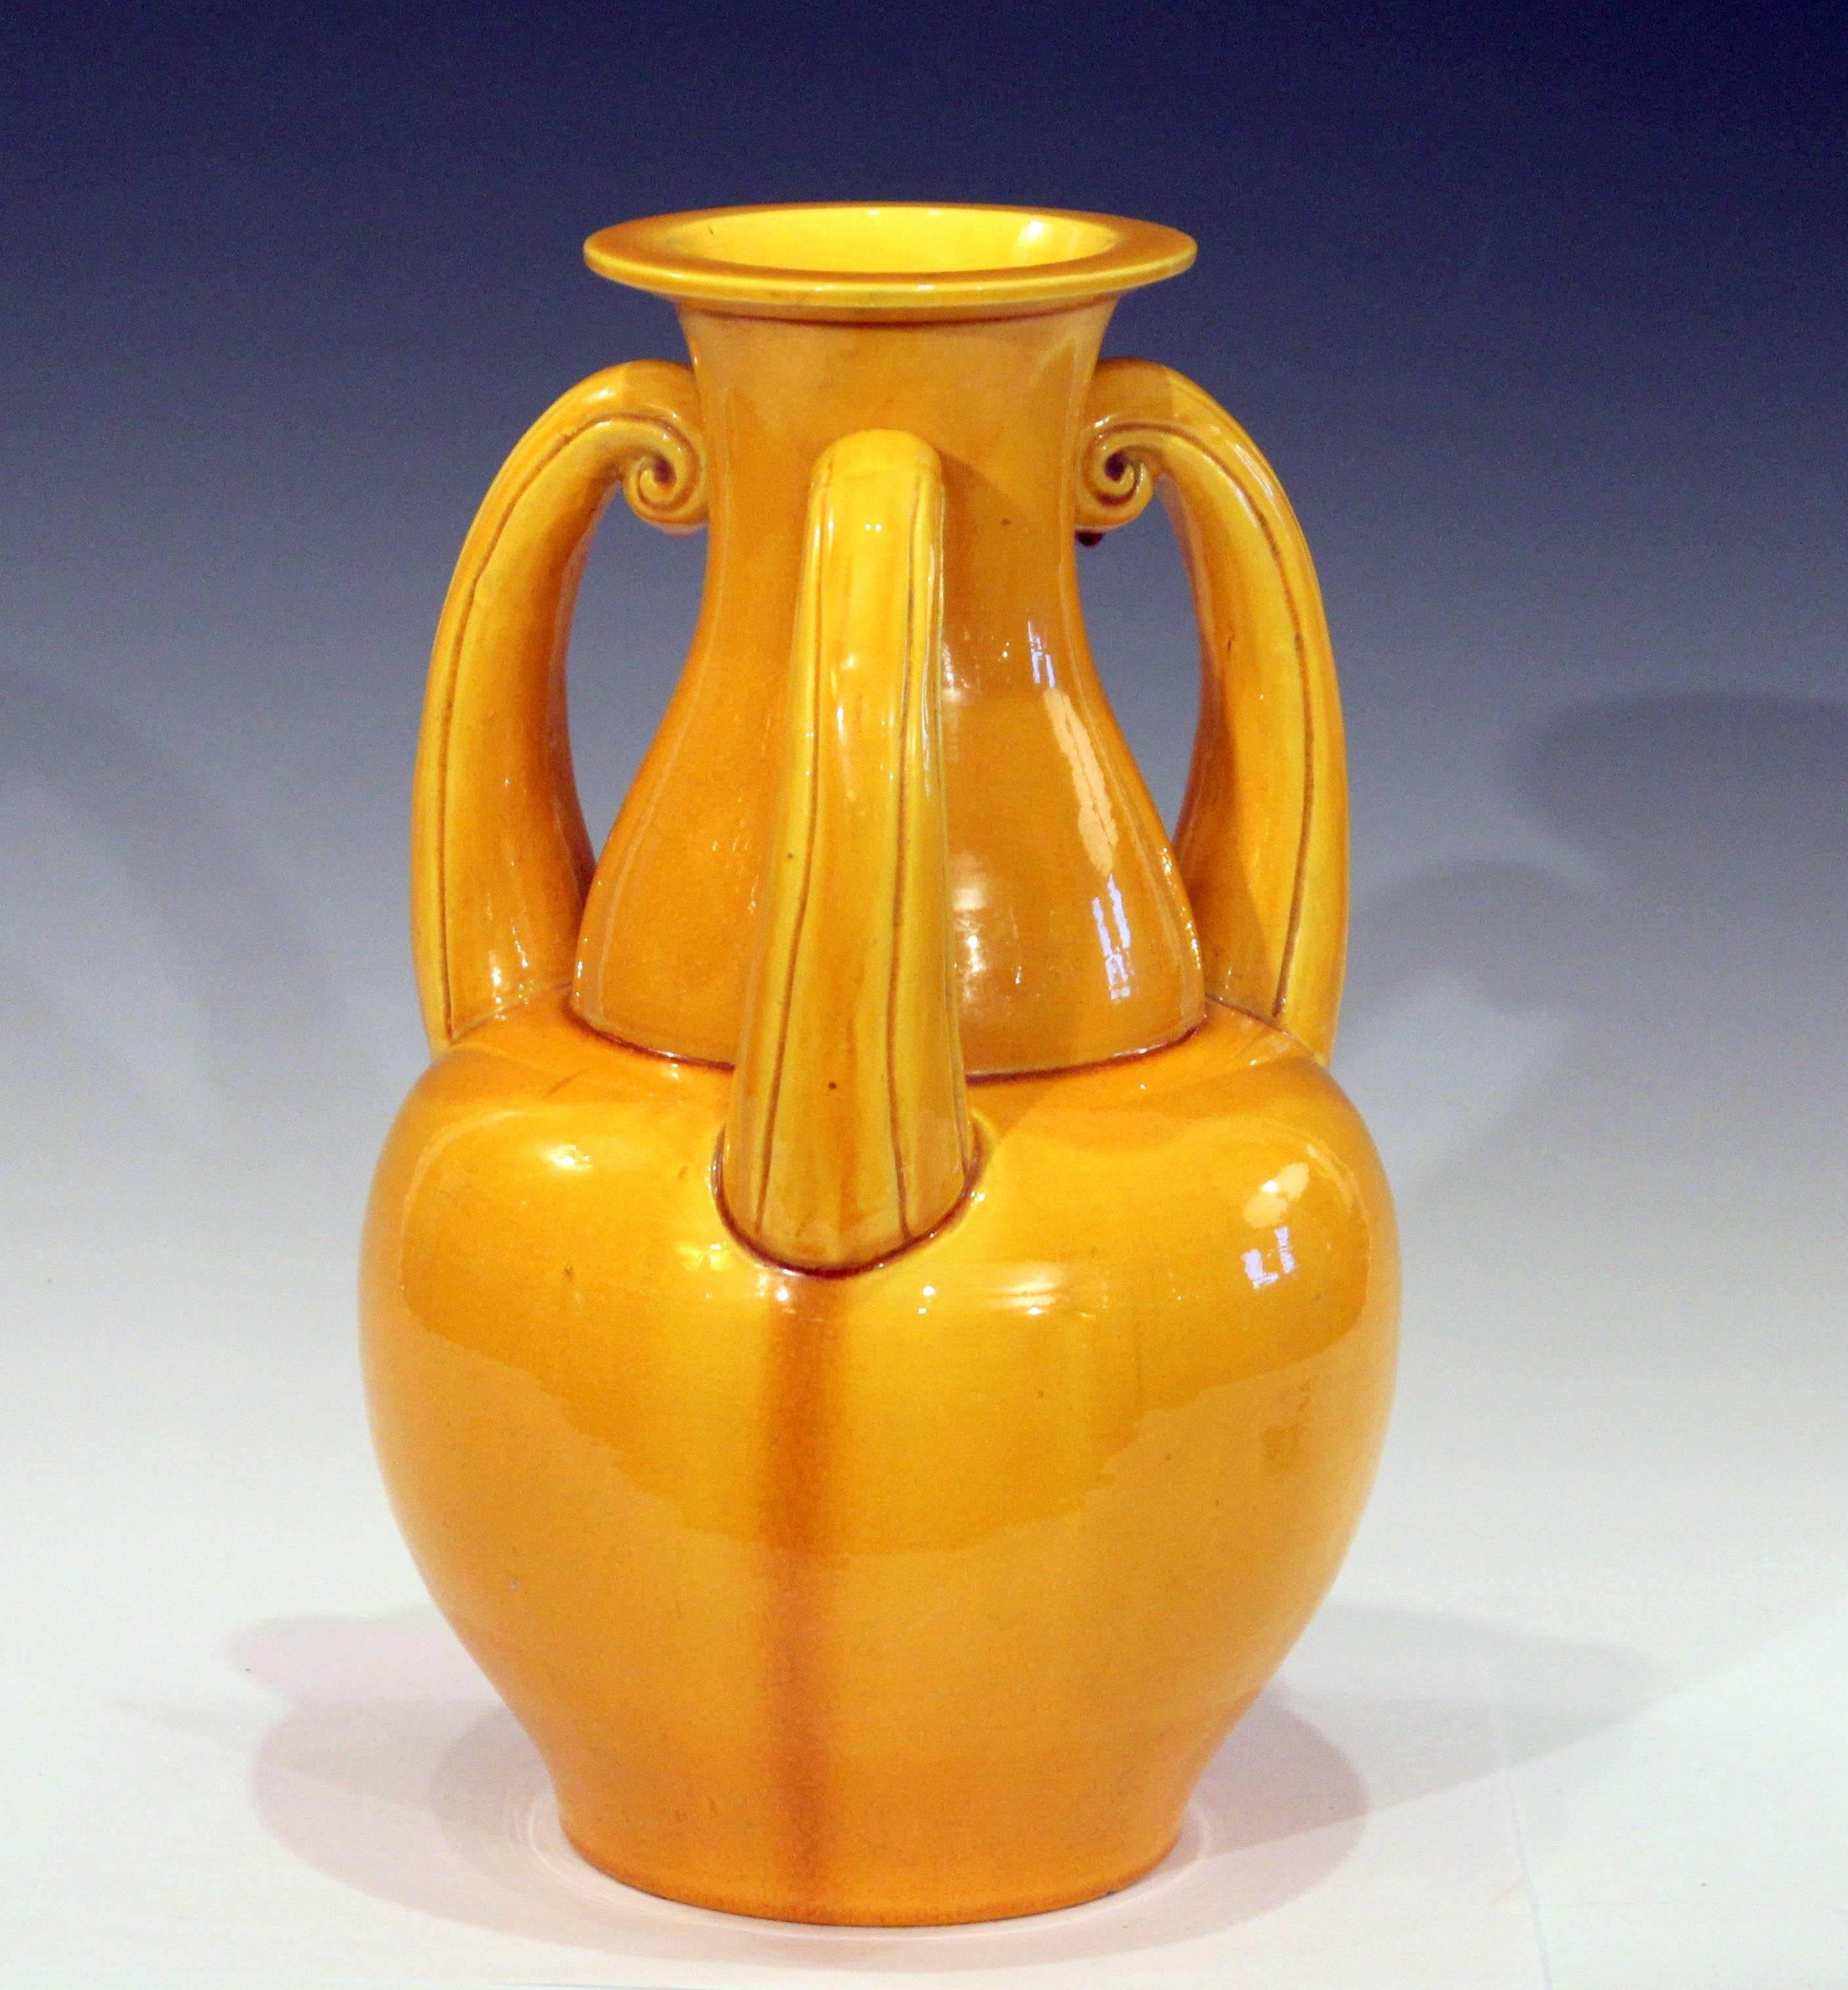 Large Awaji vase in organic gourd form with three curling handles and bright yellow glaze with fine pattern of crackle, circa 1920's. 12